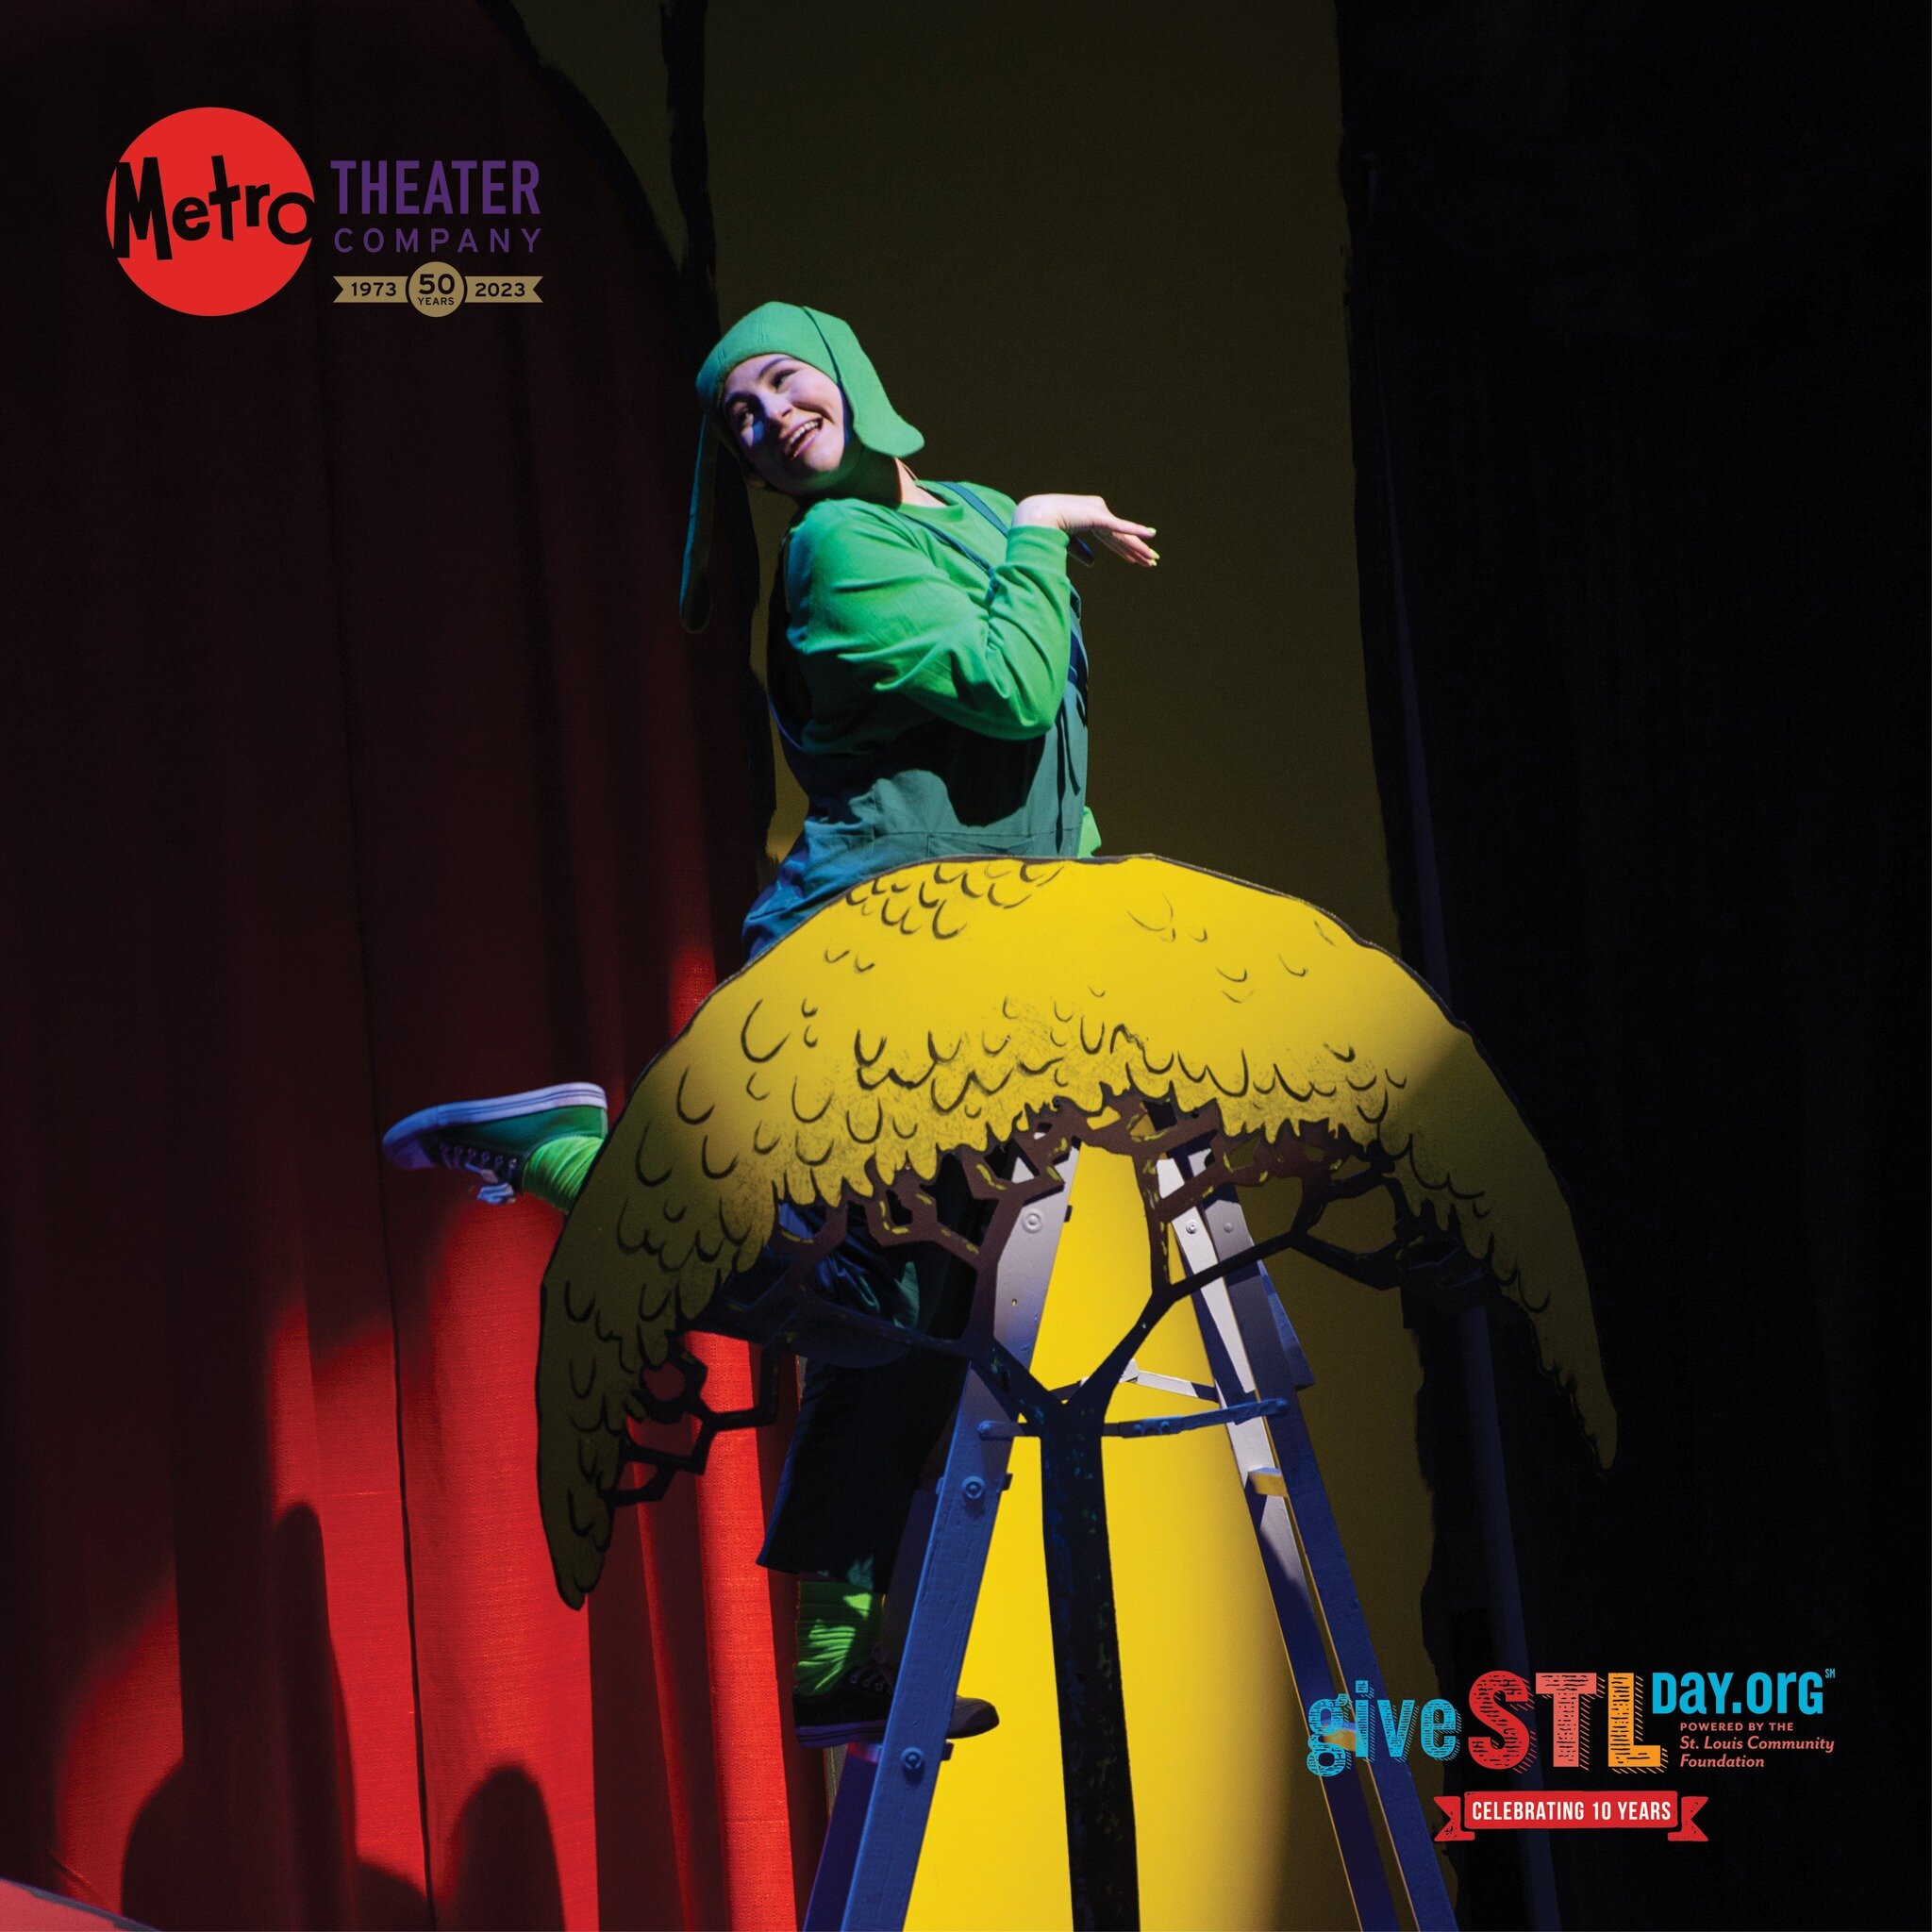 💙 Thank you for your help in making Metro Theater Company's Give STL Day campaign a great success! Our supporters raised $2,062 for MTC -- an amount that can cover the cost of a touring production for a school, plus summer camp scholarships for two 